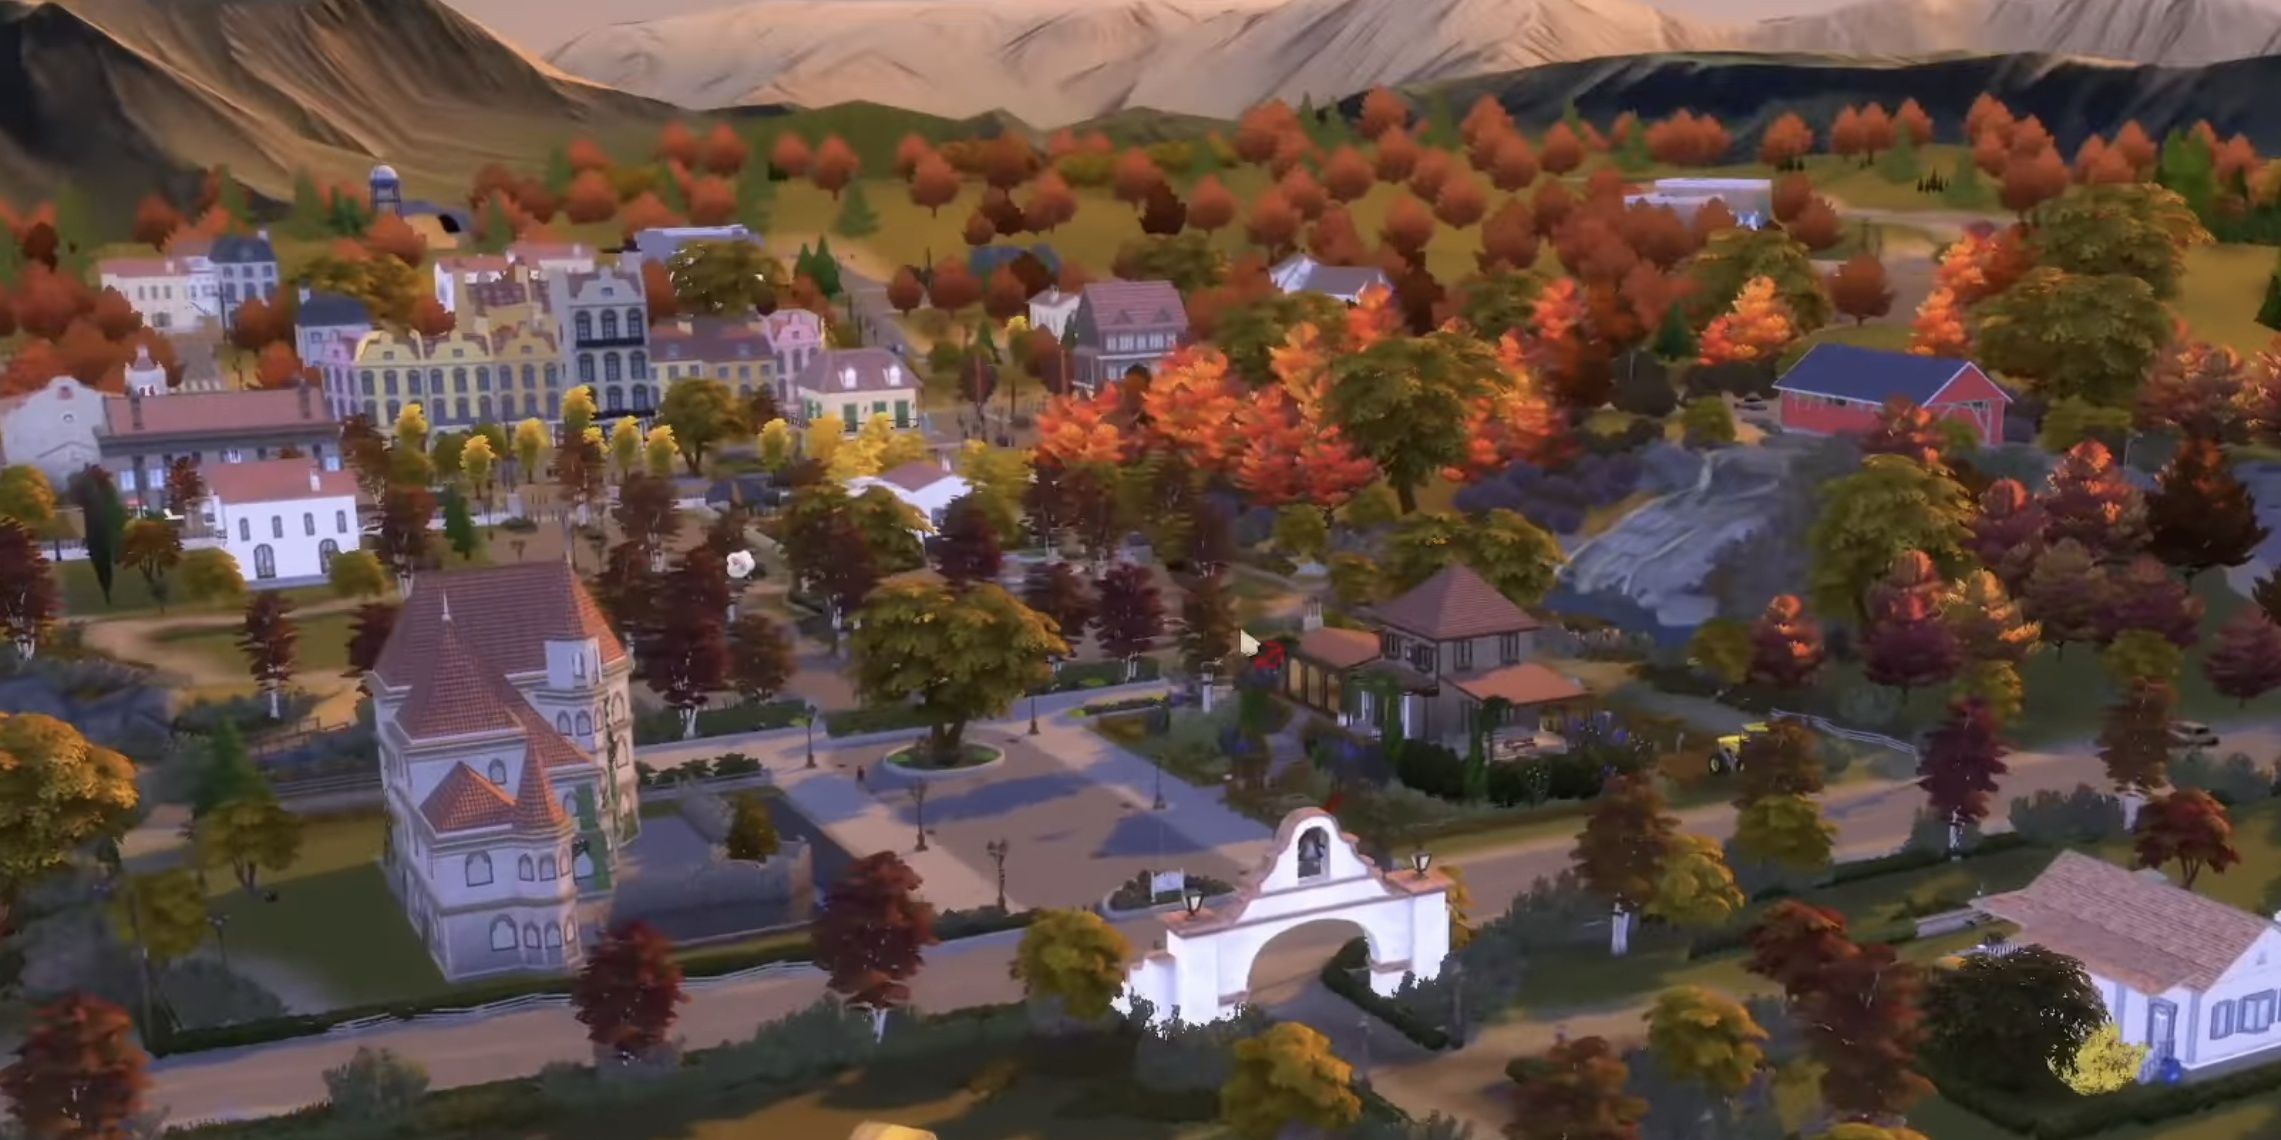 This is Eden Hills' Town Square, with many of its community lots (plus, some beautiful rural scenery)